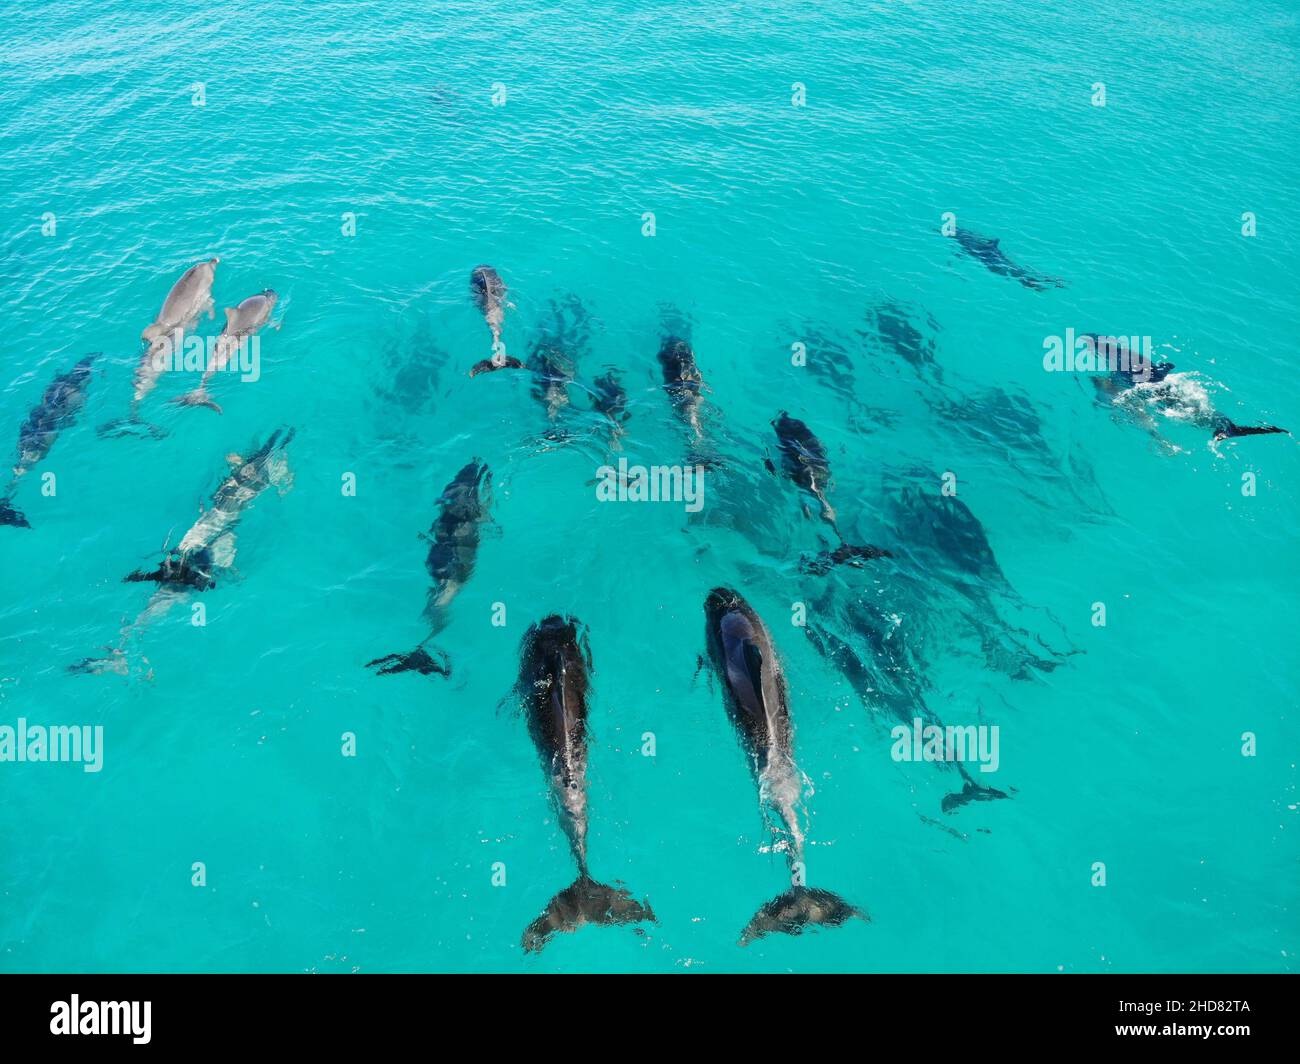 Created by dji camera, in Esperance Western Australia, a group of dolphins in the ocean Stock Photo